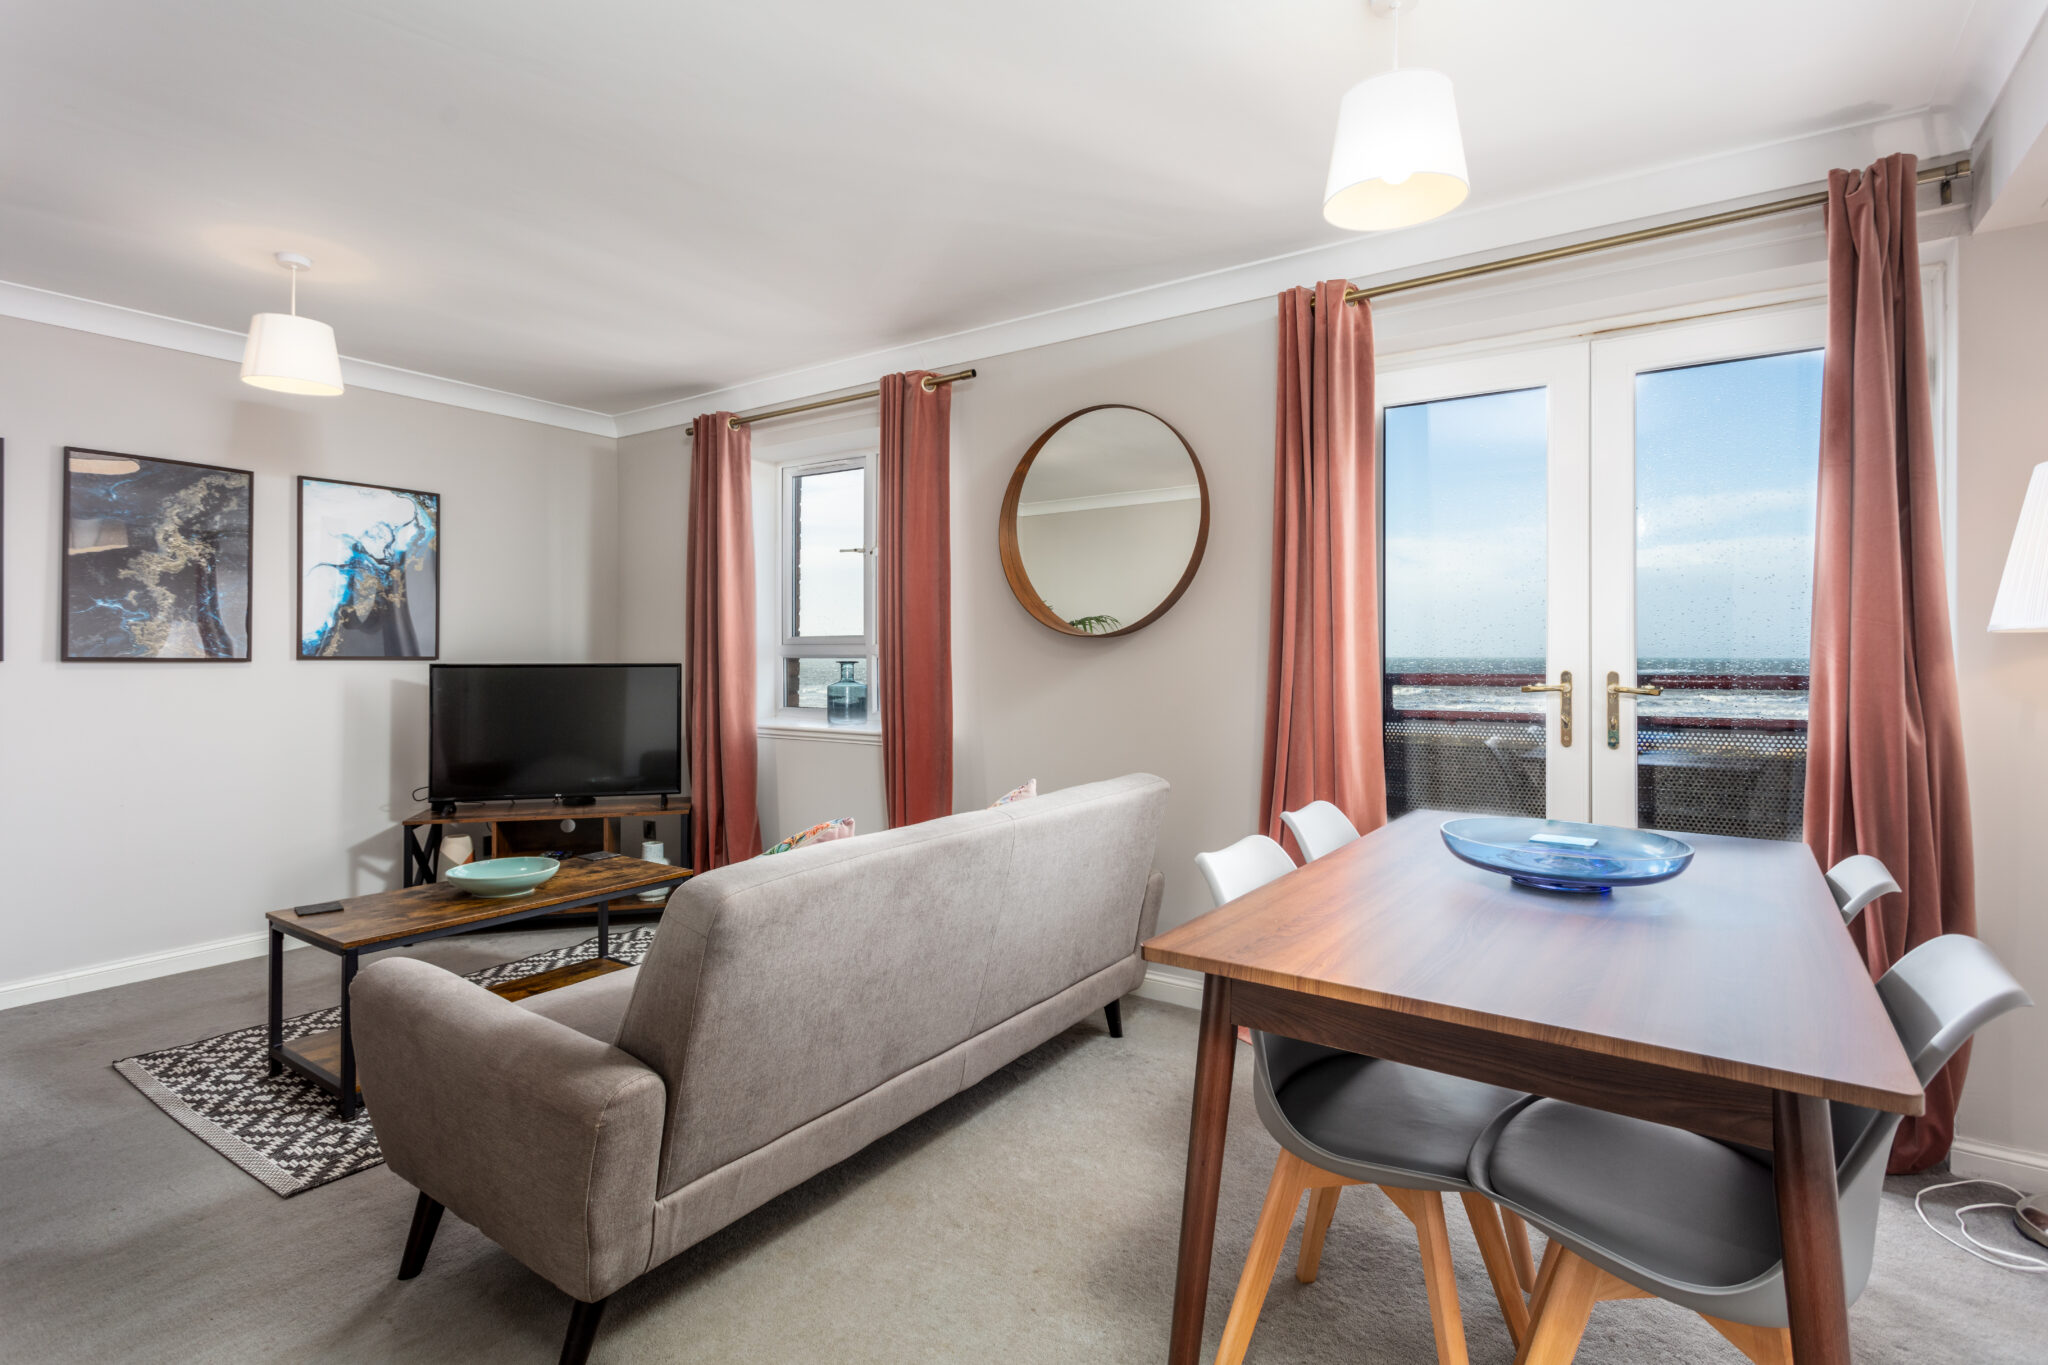 Book Holiday Accommodation in Ayr Near The Beach, Prestwick Golf Club, and Gatwick Prestwick Airport! Our Apartments are Cheaper Than Hotels | Urban Stay